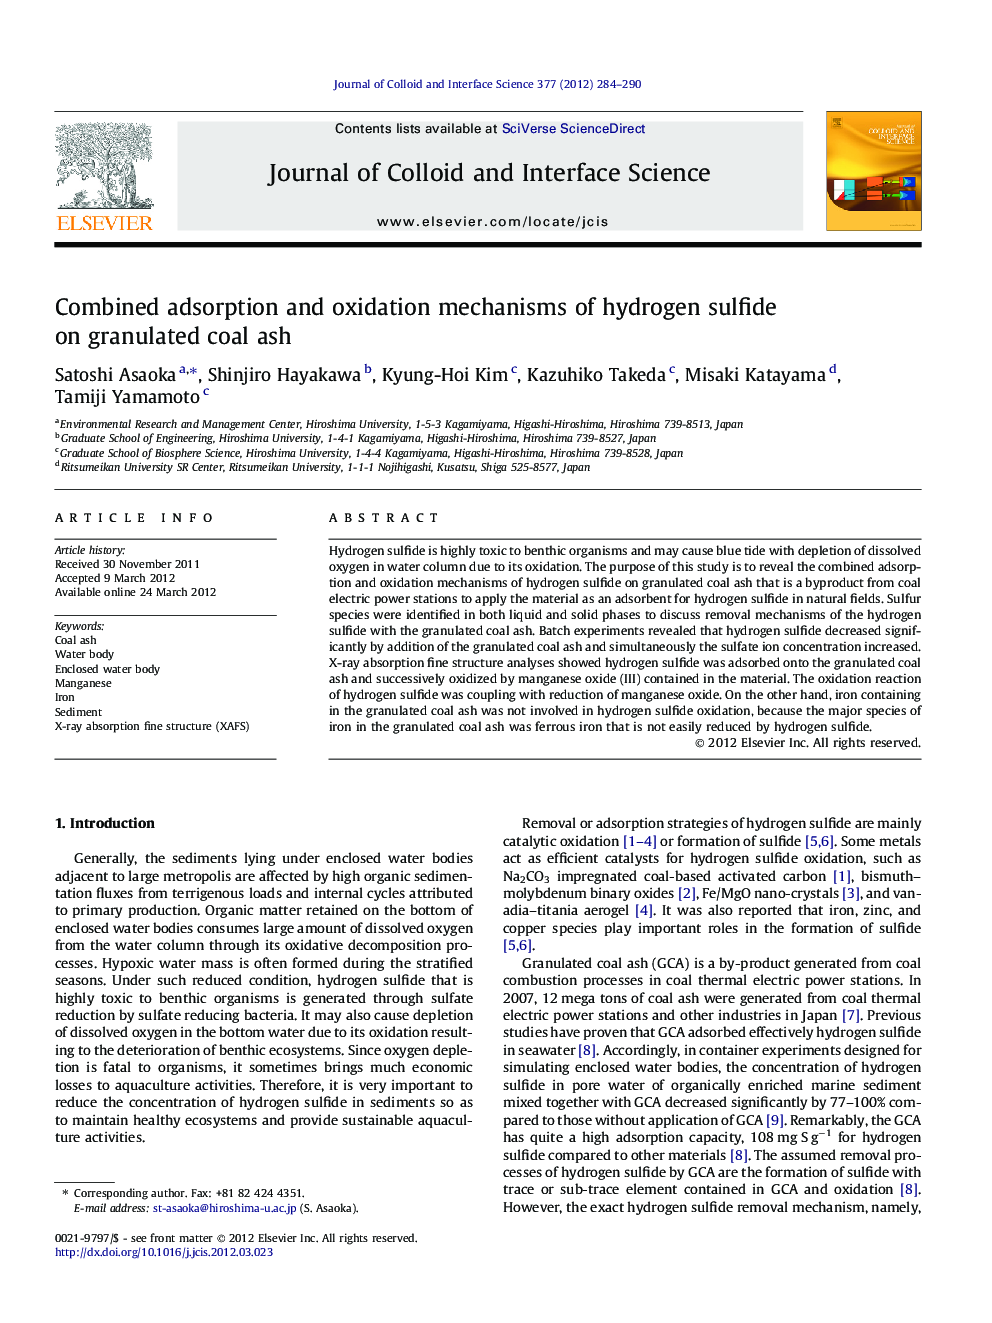 Combined adsorption and oxidation mechanisms of hydrogen sulfide on granulated coal ash